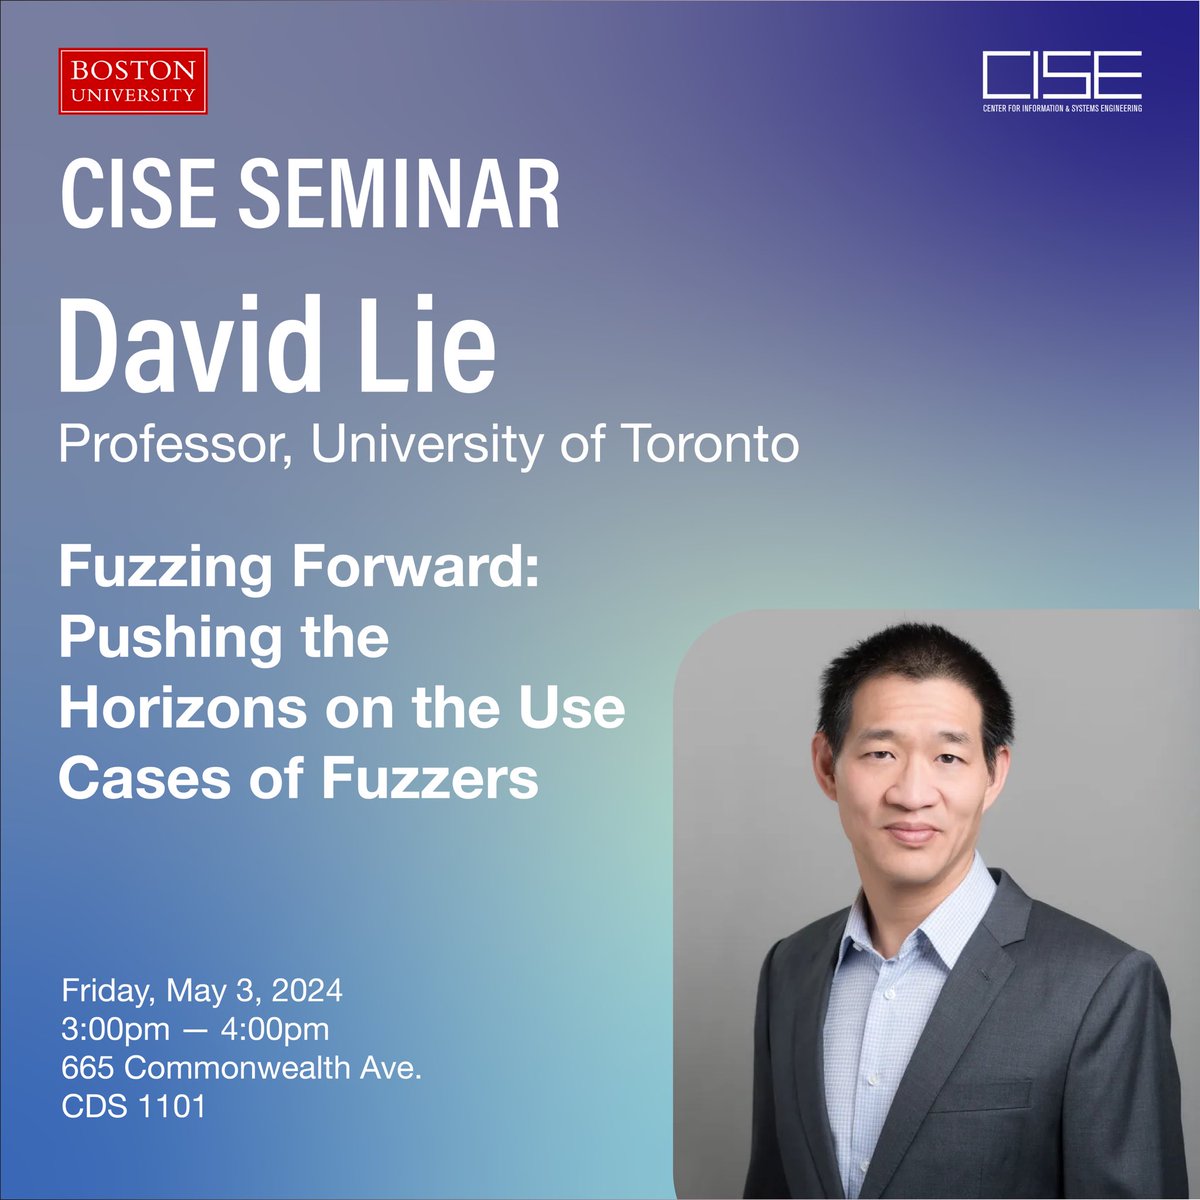 Join us this Friday to hear David Lie's CISE Seminar at CDS 1101 from 3-4PM! Read the abstract here: bu.edu/cise/cise-semi…